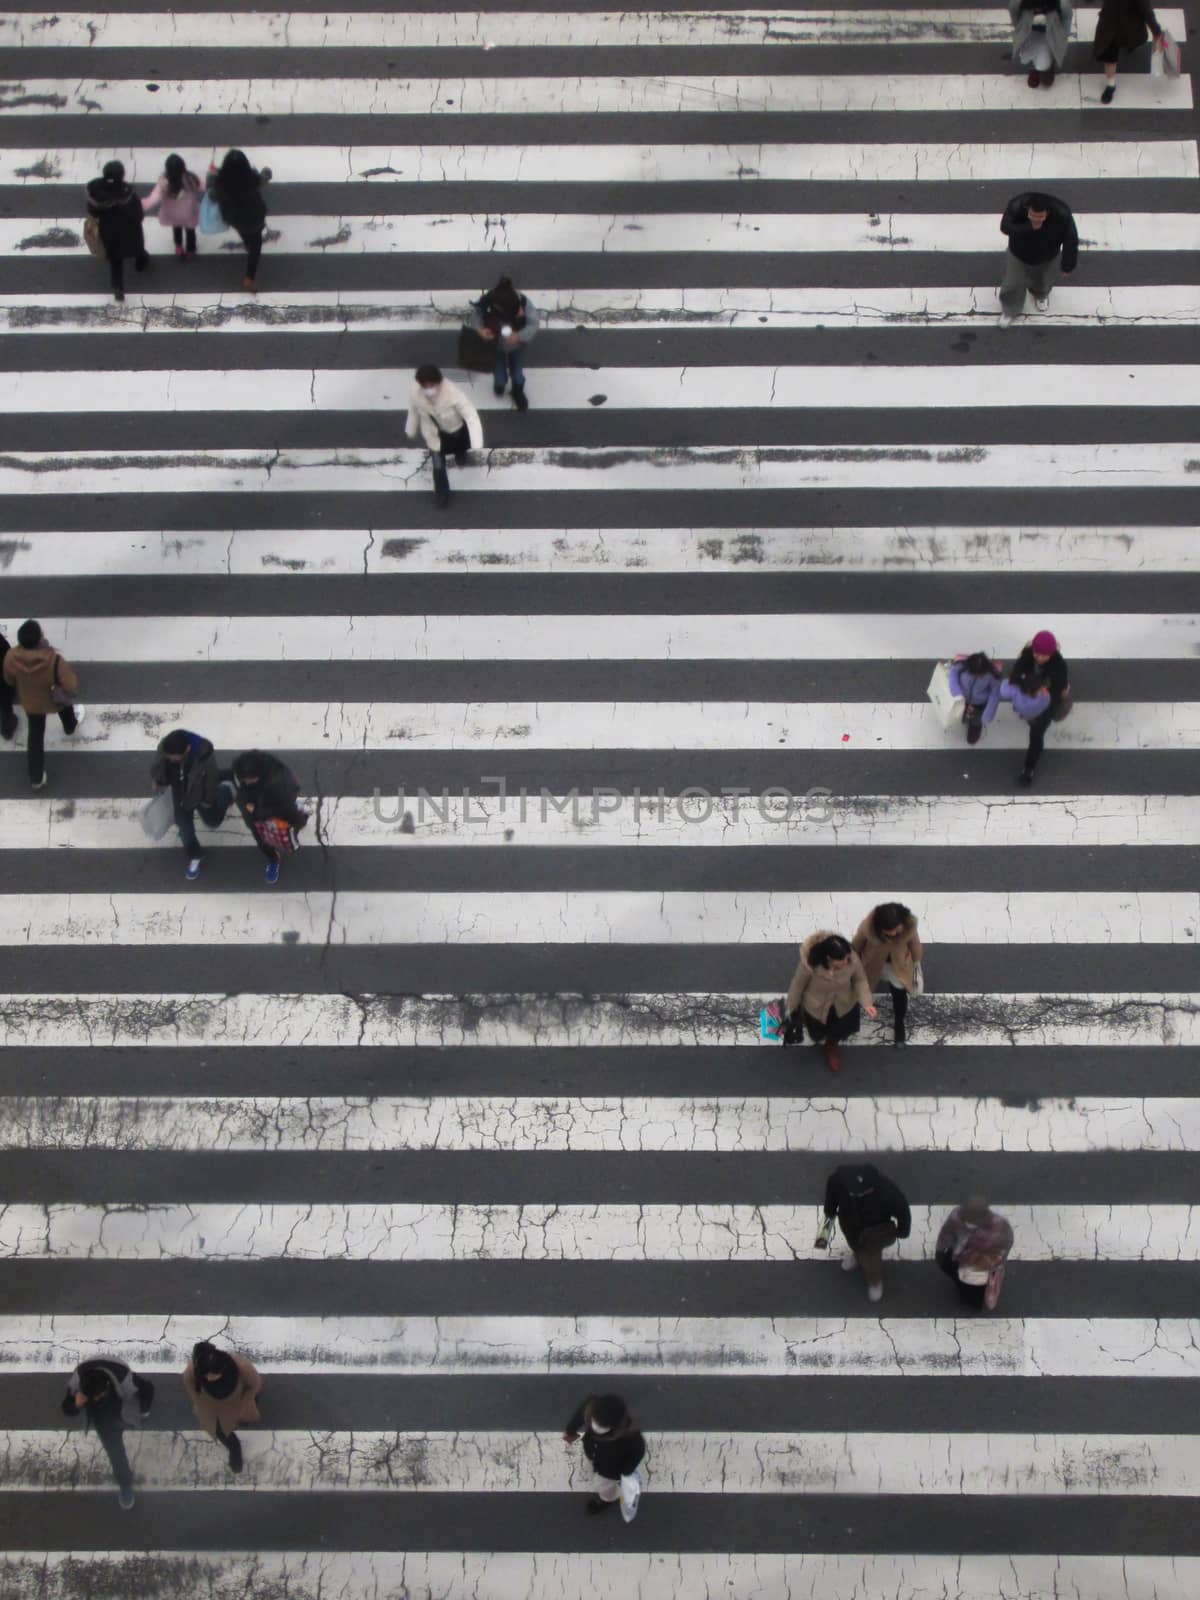 KYOTO, JAPAN - JANUARY 19, 2015: Bird view close up on a big black white crossing in Tokyo while Japanese people are walking over on January 19, 2015 in Kyoto, Japan.